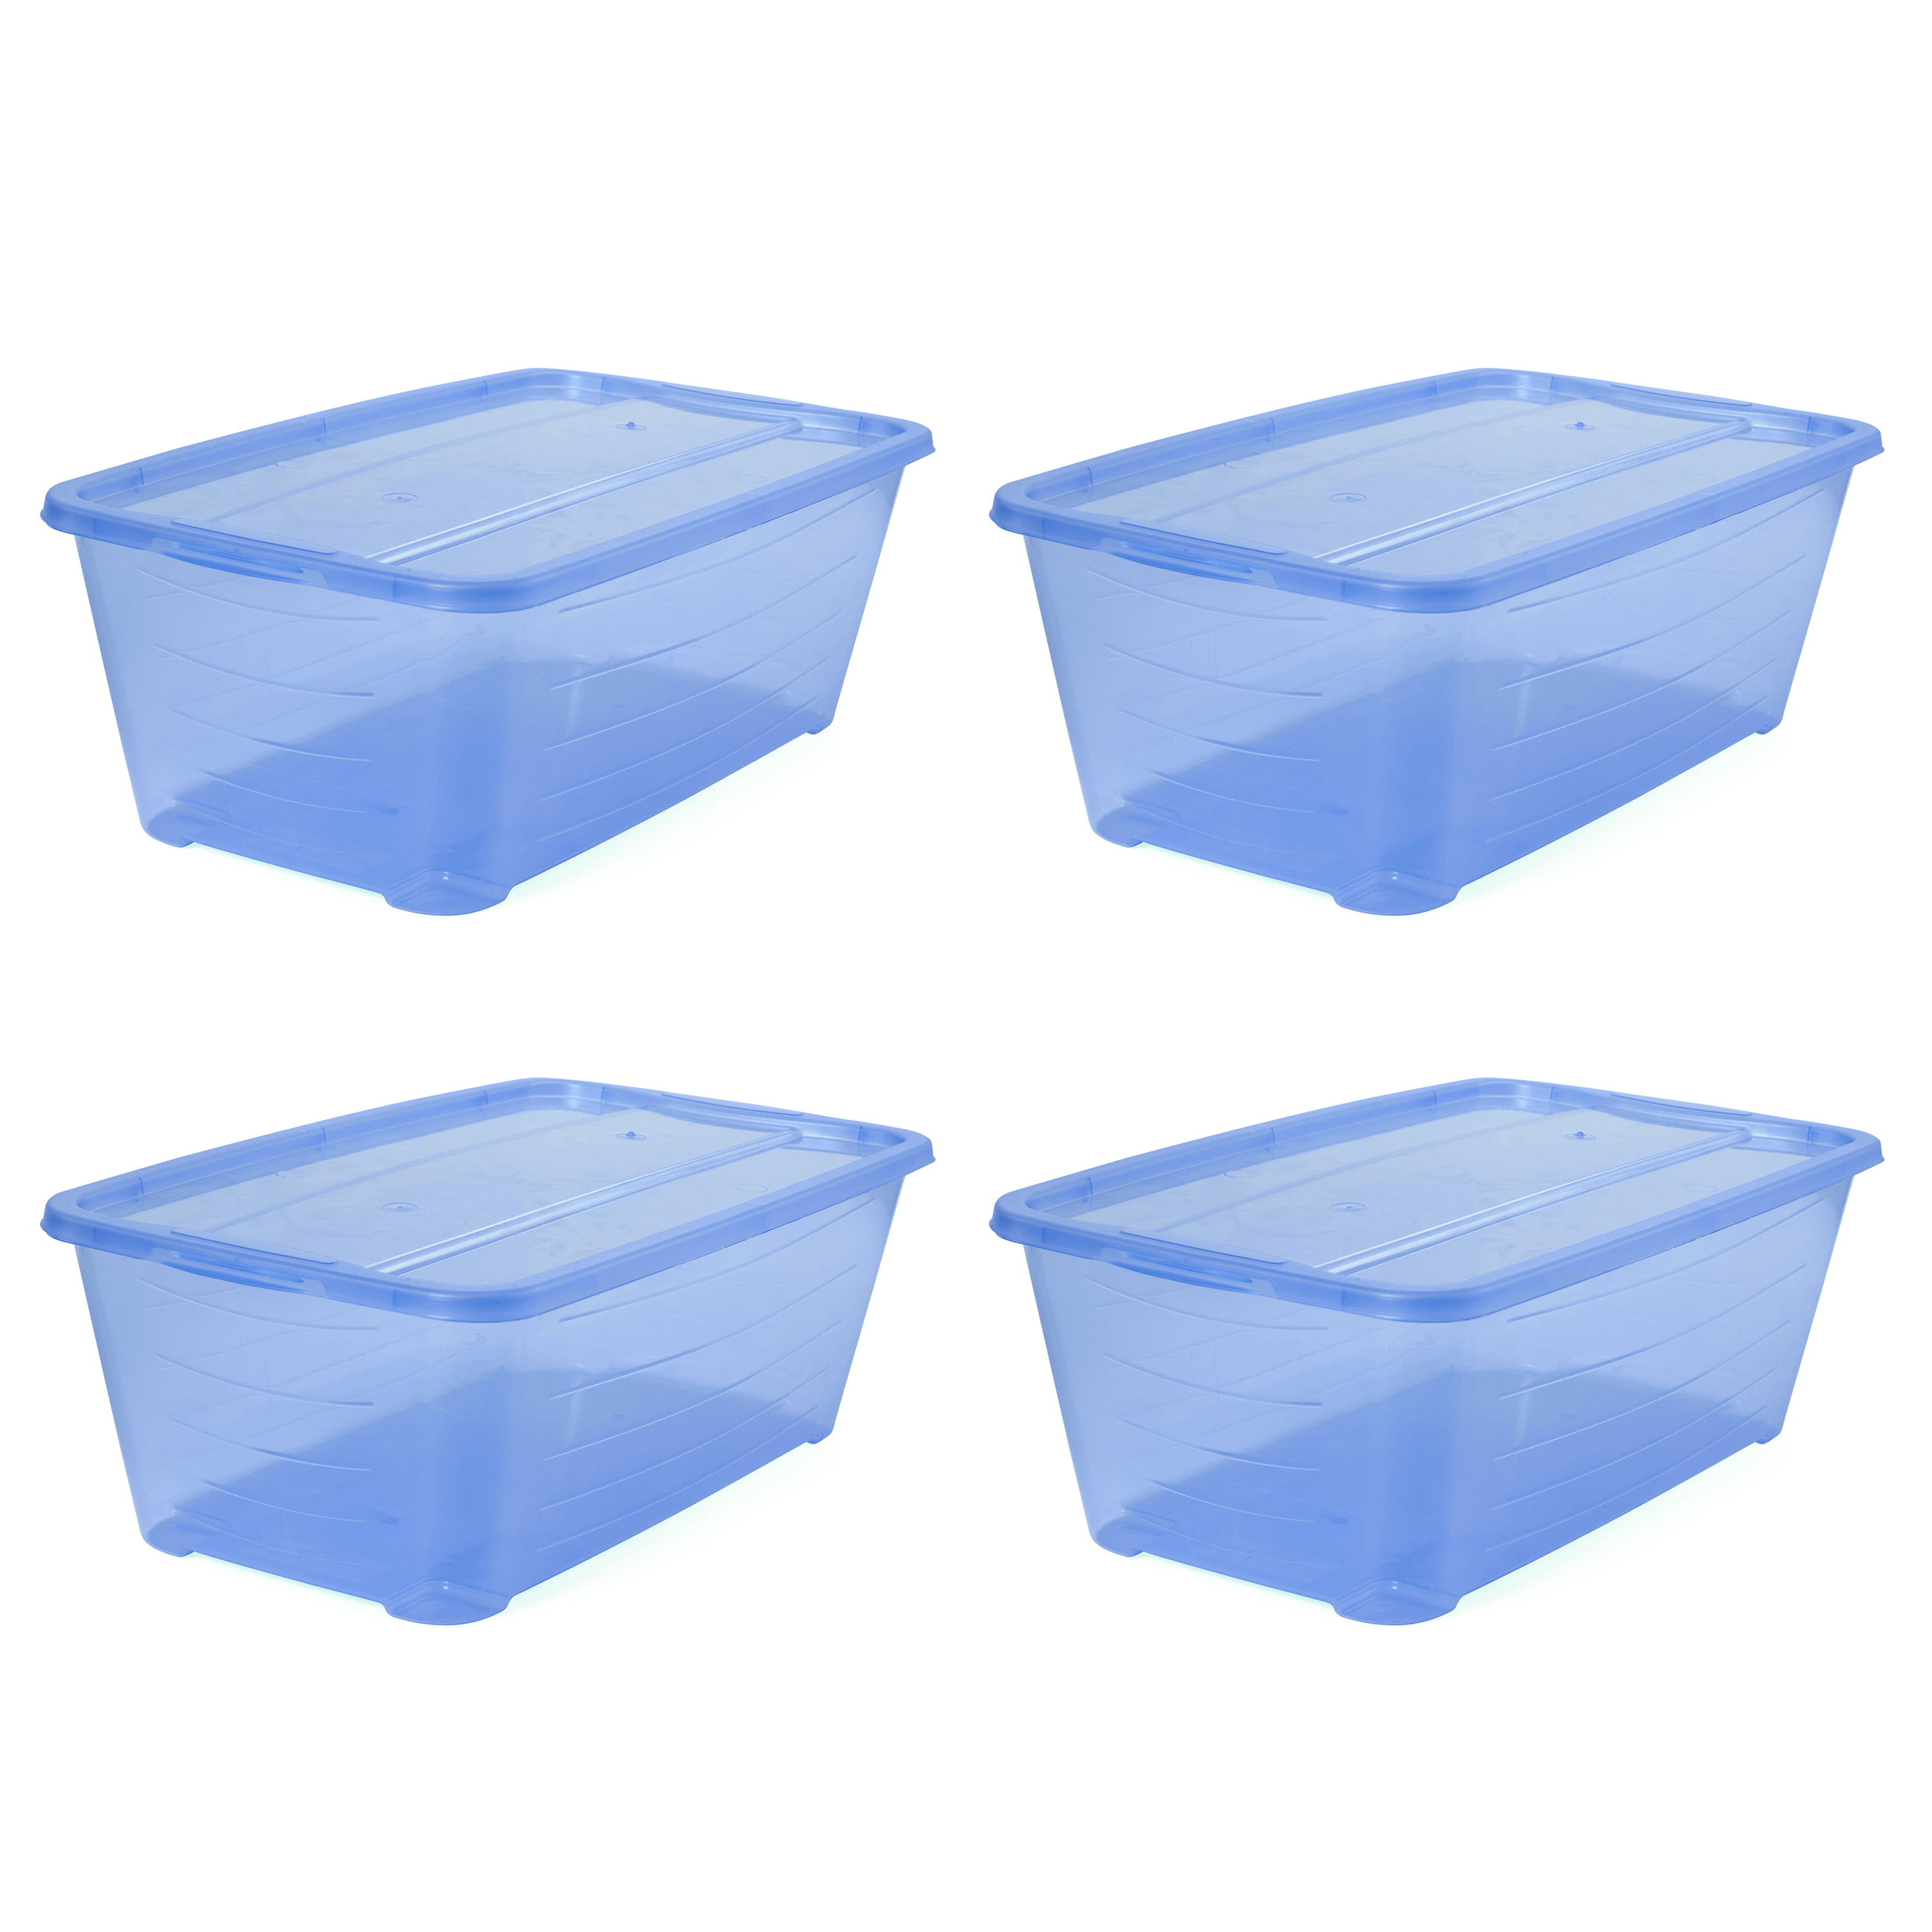 NEW PACK OF RECTANGULAR STORAGE BOXES 5 ASSORTED SIZES ASSORTED COLOURS 